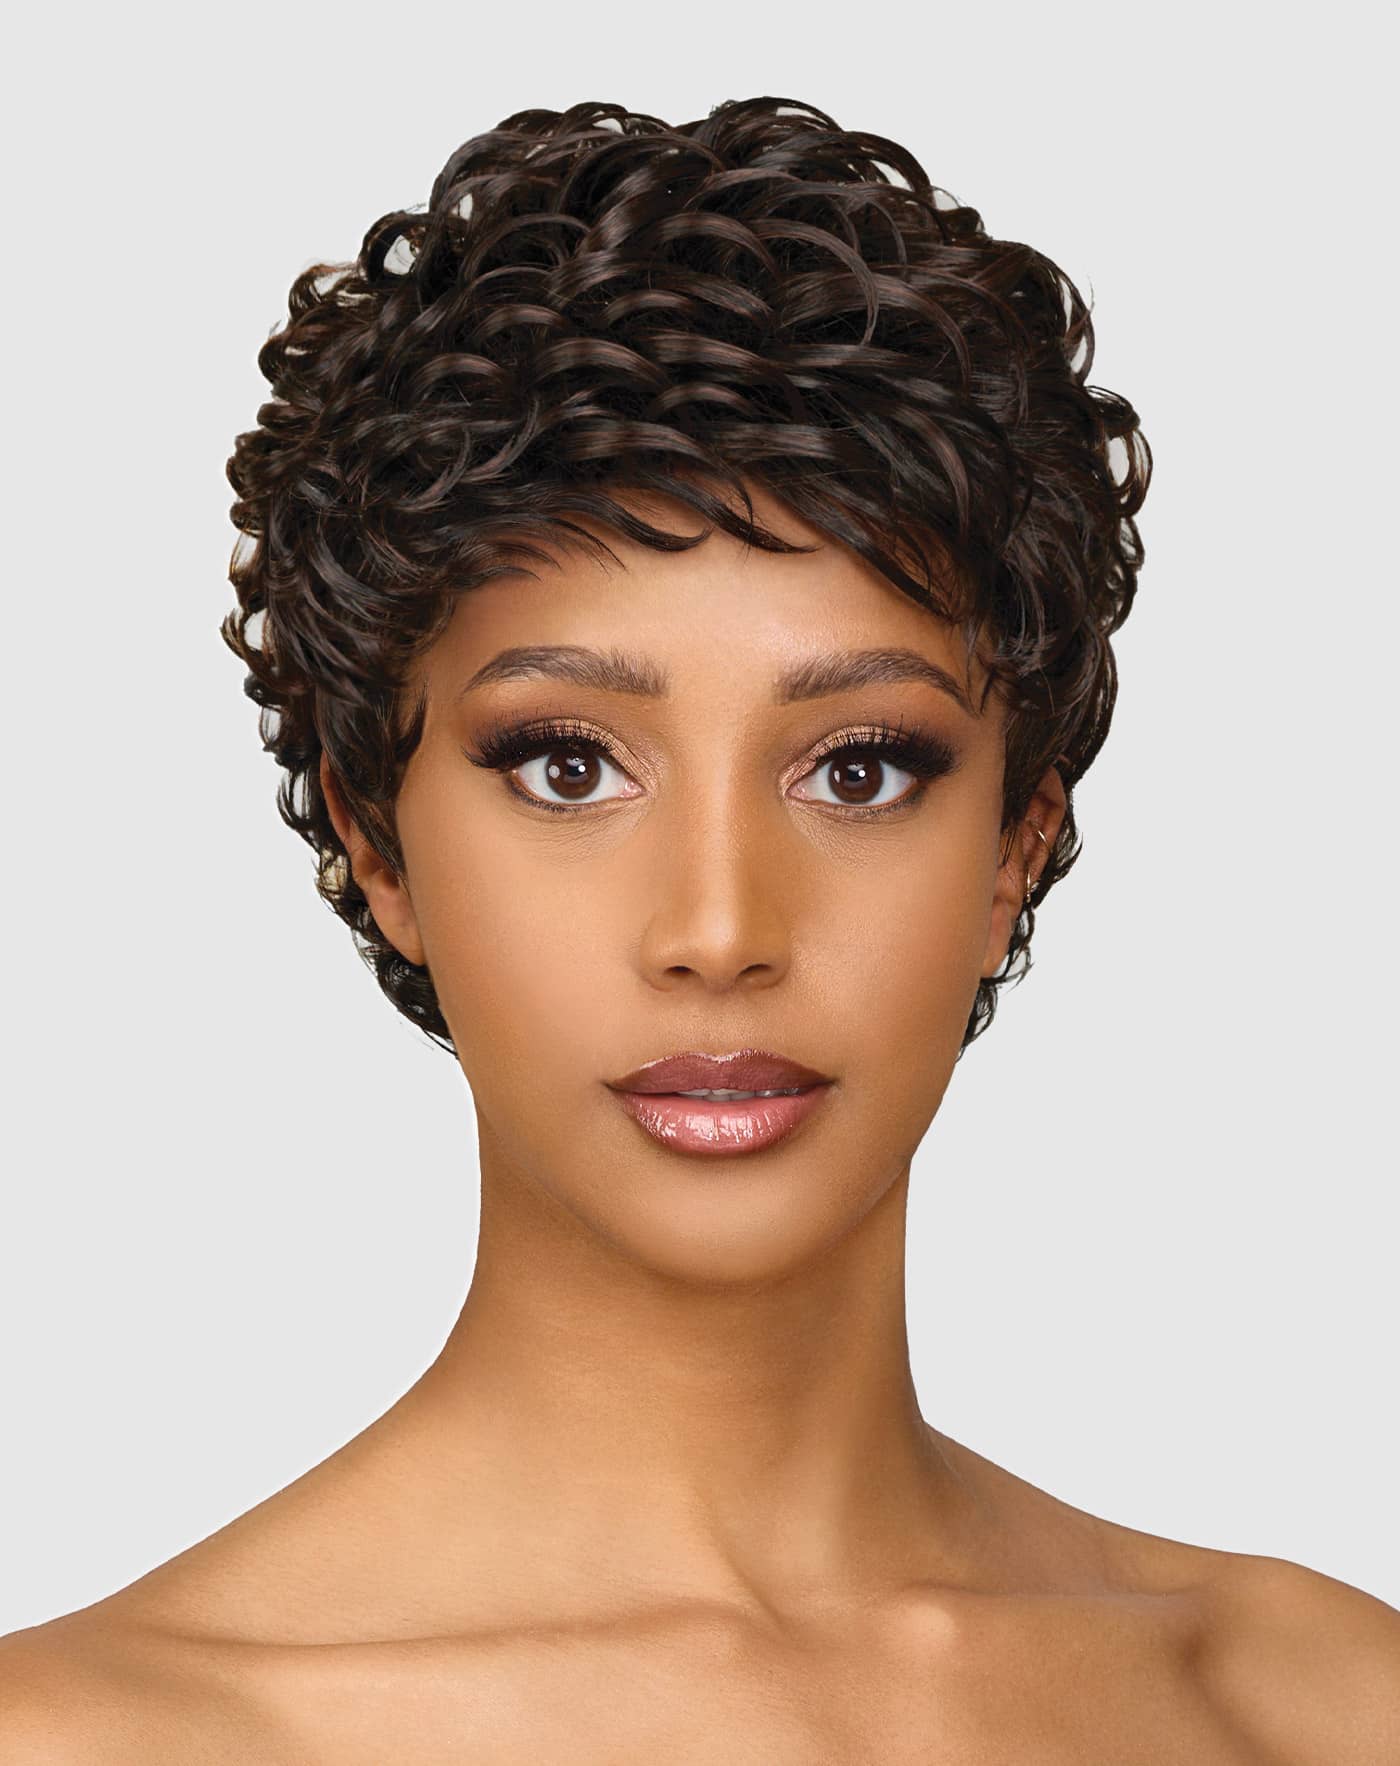 Vanessa Fashion Wig Synthetic Wig GEE